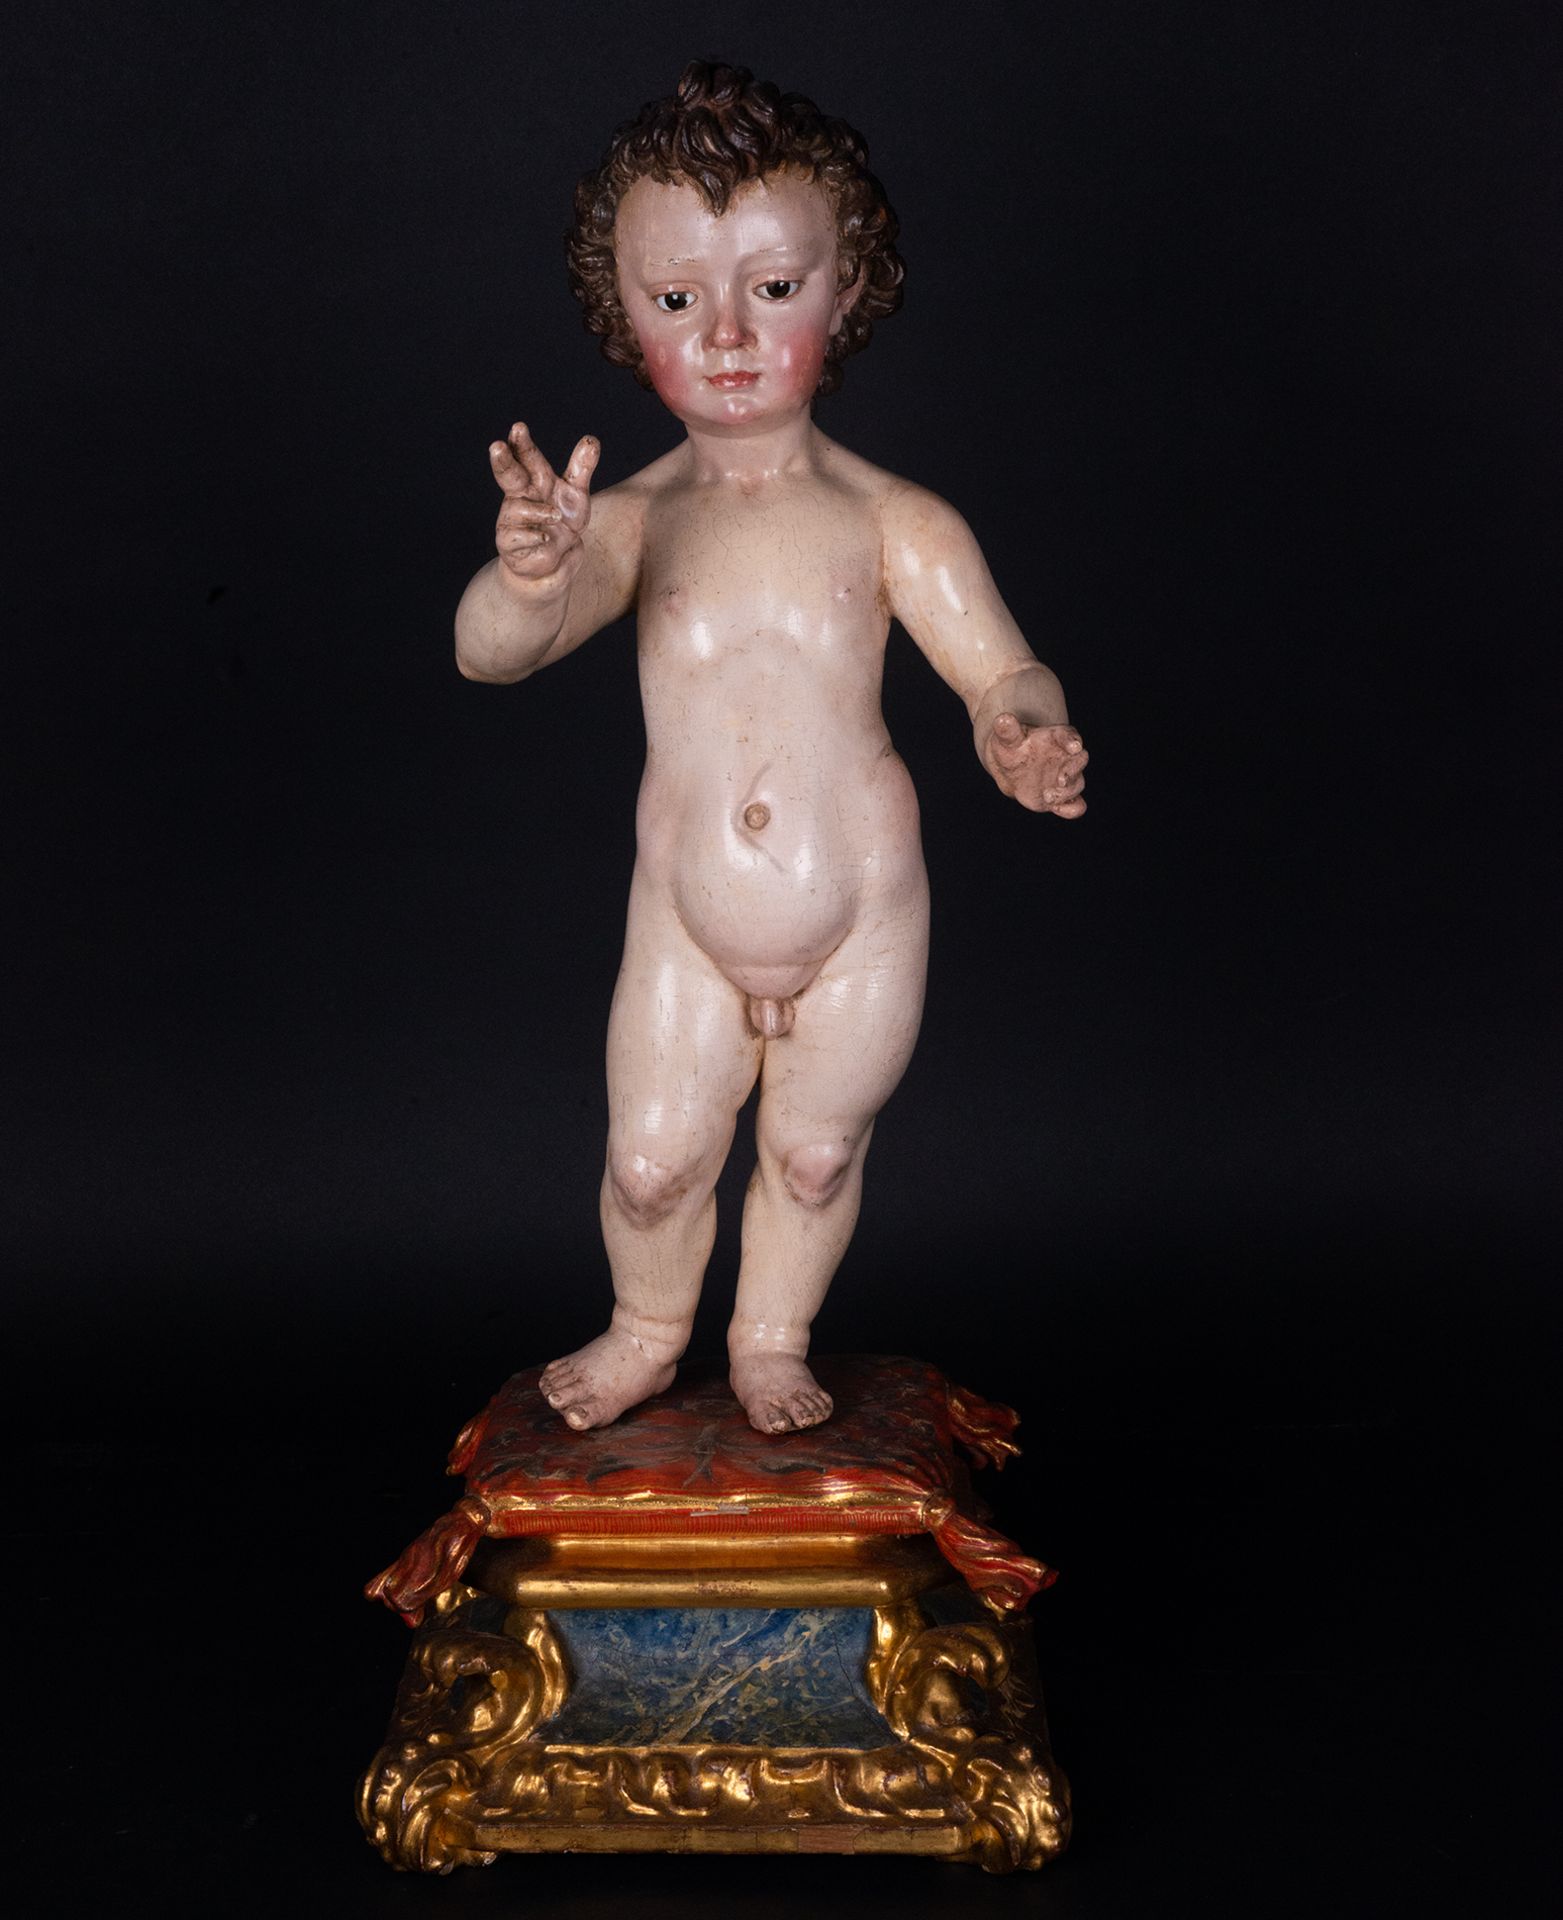 Attributed to the Circle of Juan Martinez Montanes, Enfant Jesus Triumphant, Spanish school of the 1